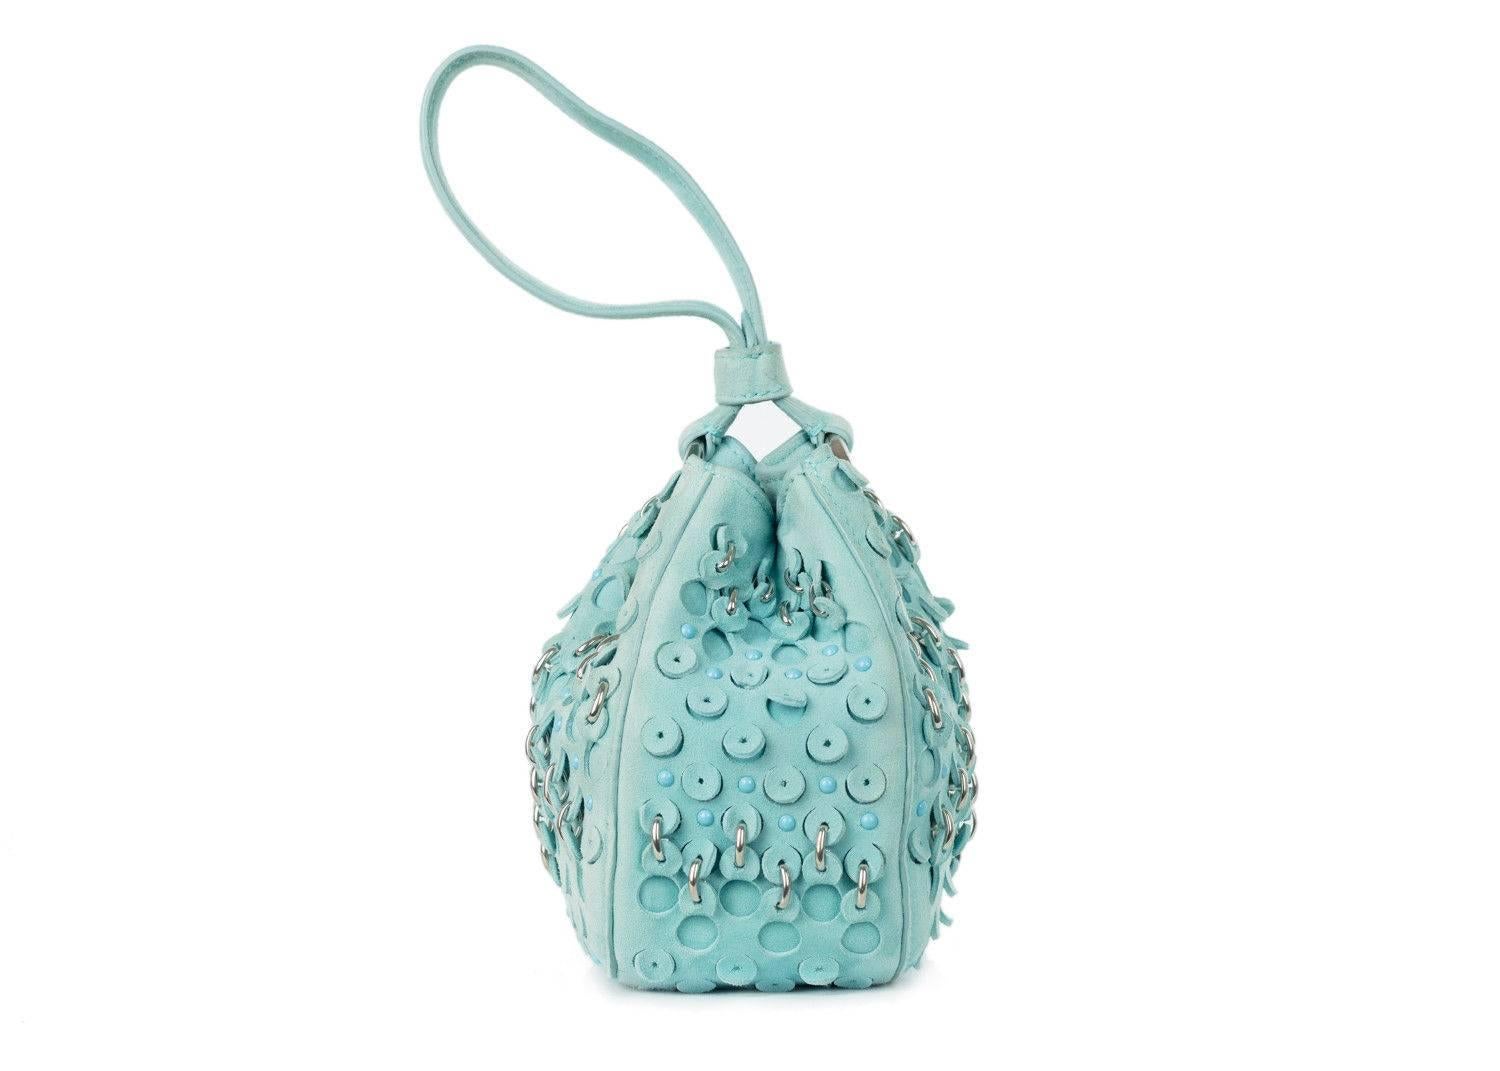 Roberto Cavalli turqouise suede wristlet bucket bag. This bag features eyelet patterns studded accents and a wristlet. Perfect summer bag, this bag can be paired with dark wash shorts or denimm with a floral top and sandals for this bag to pop.

